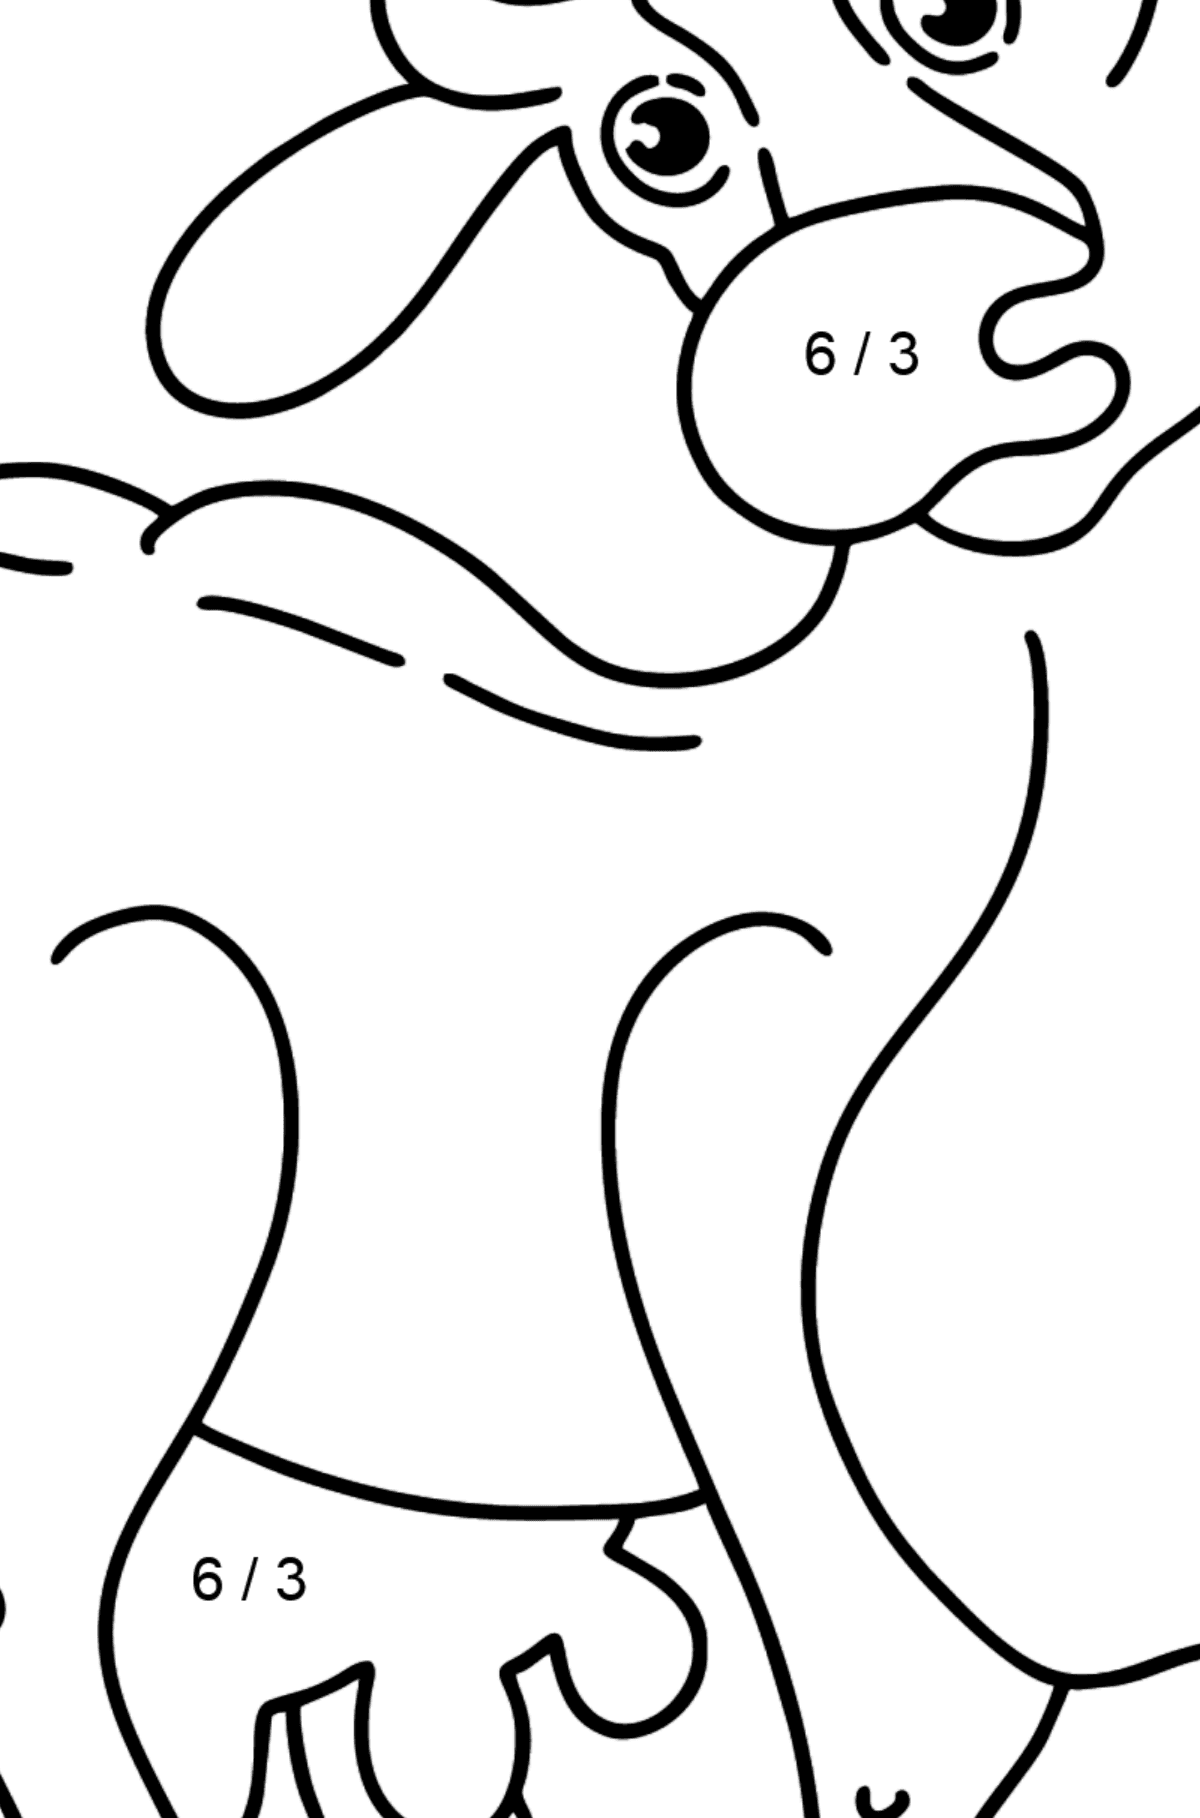 Cow coloring page - Math Coloring - Division for Kids